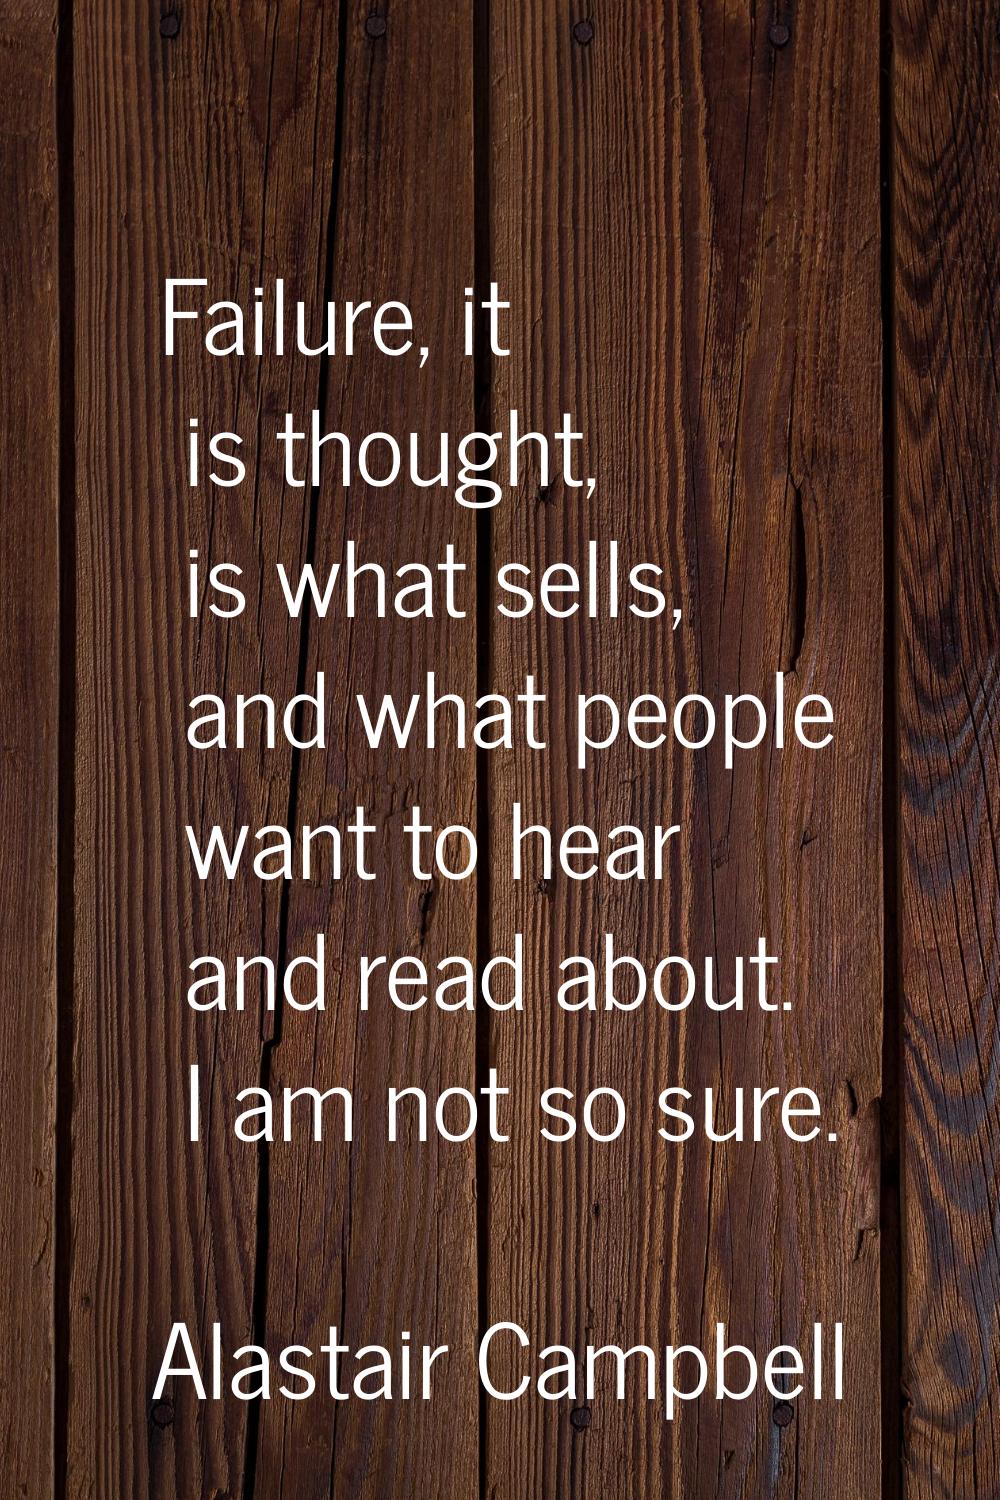 Failure, it is thought, is what sells, and what people want to hear and read about. I am not so sur